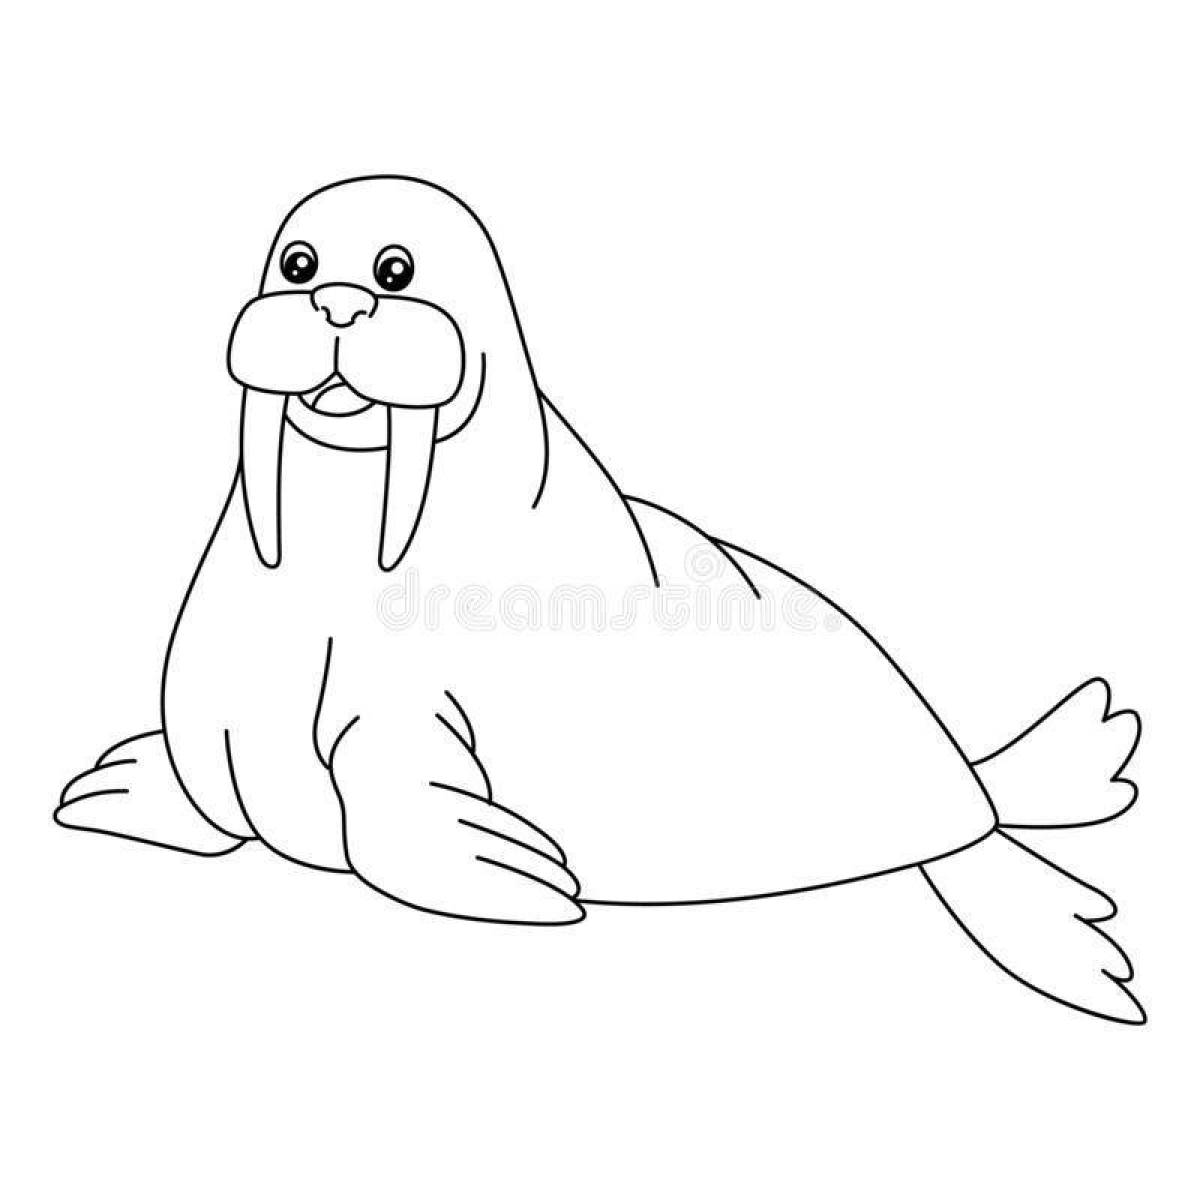 Incredible walrus coloring book for kids